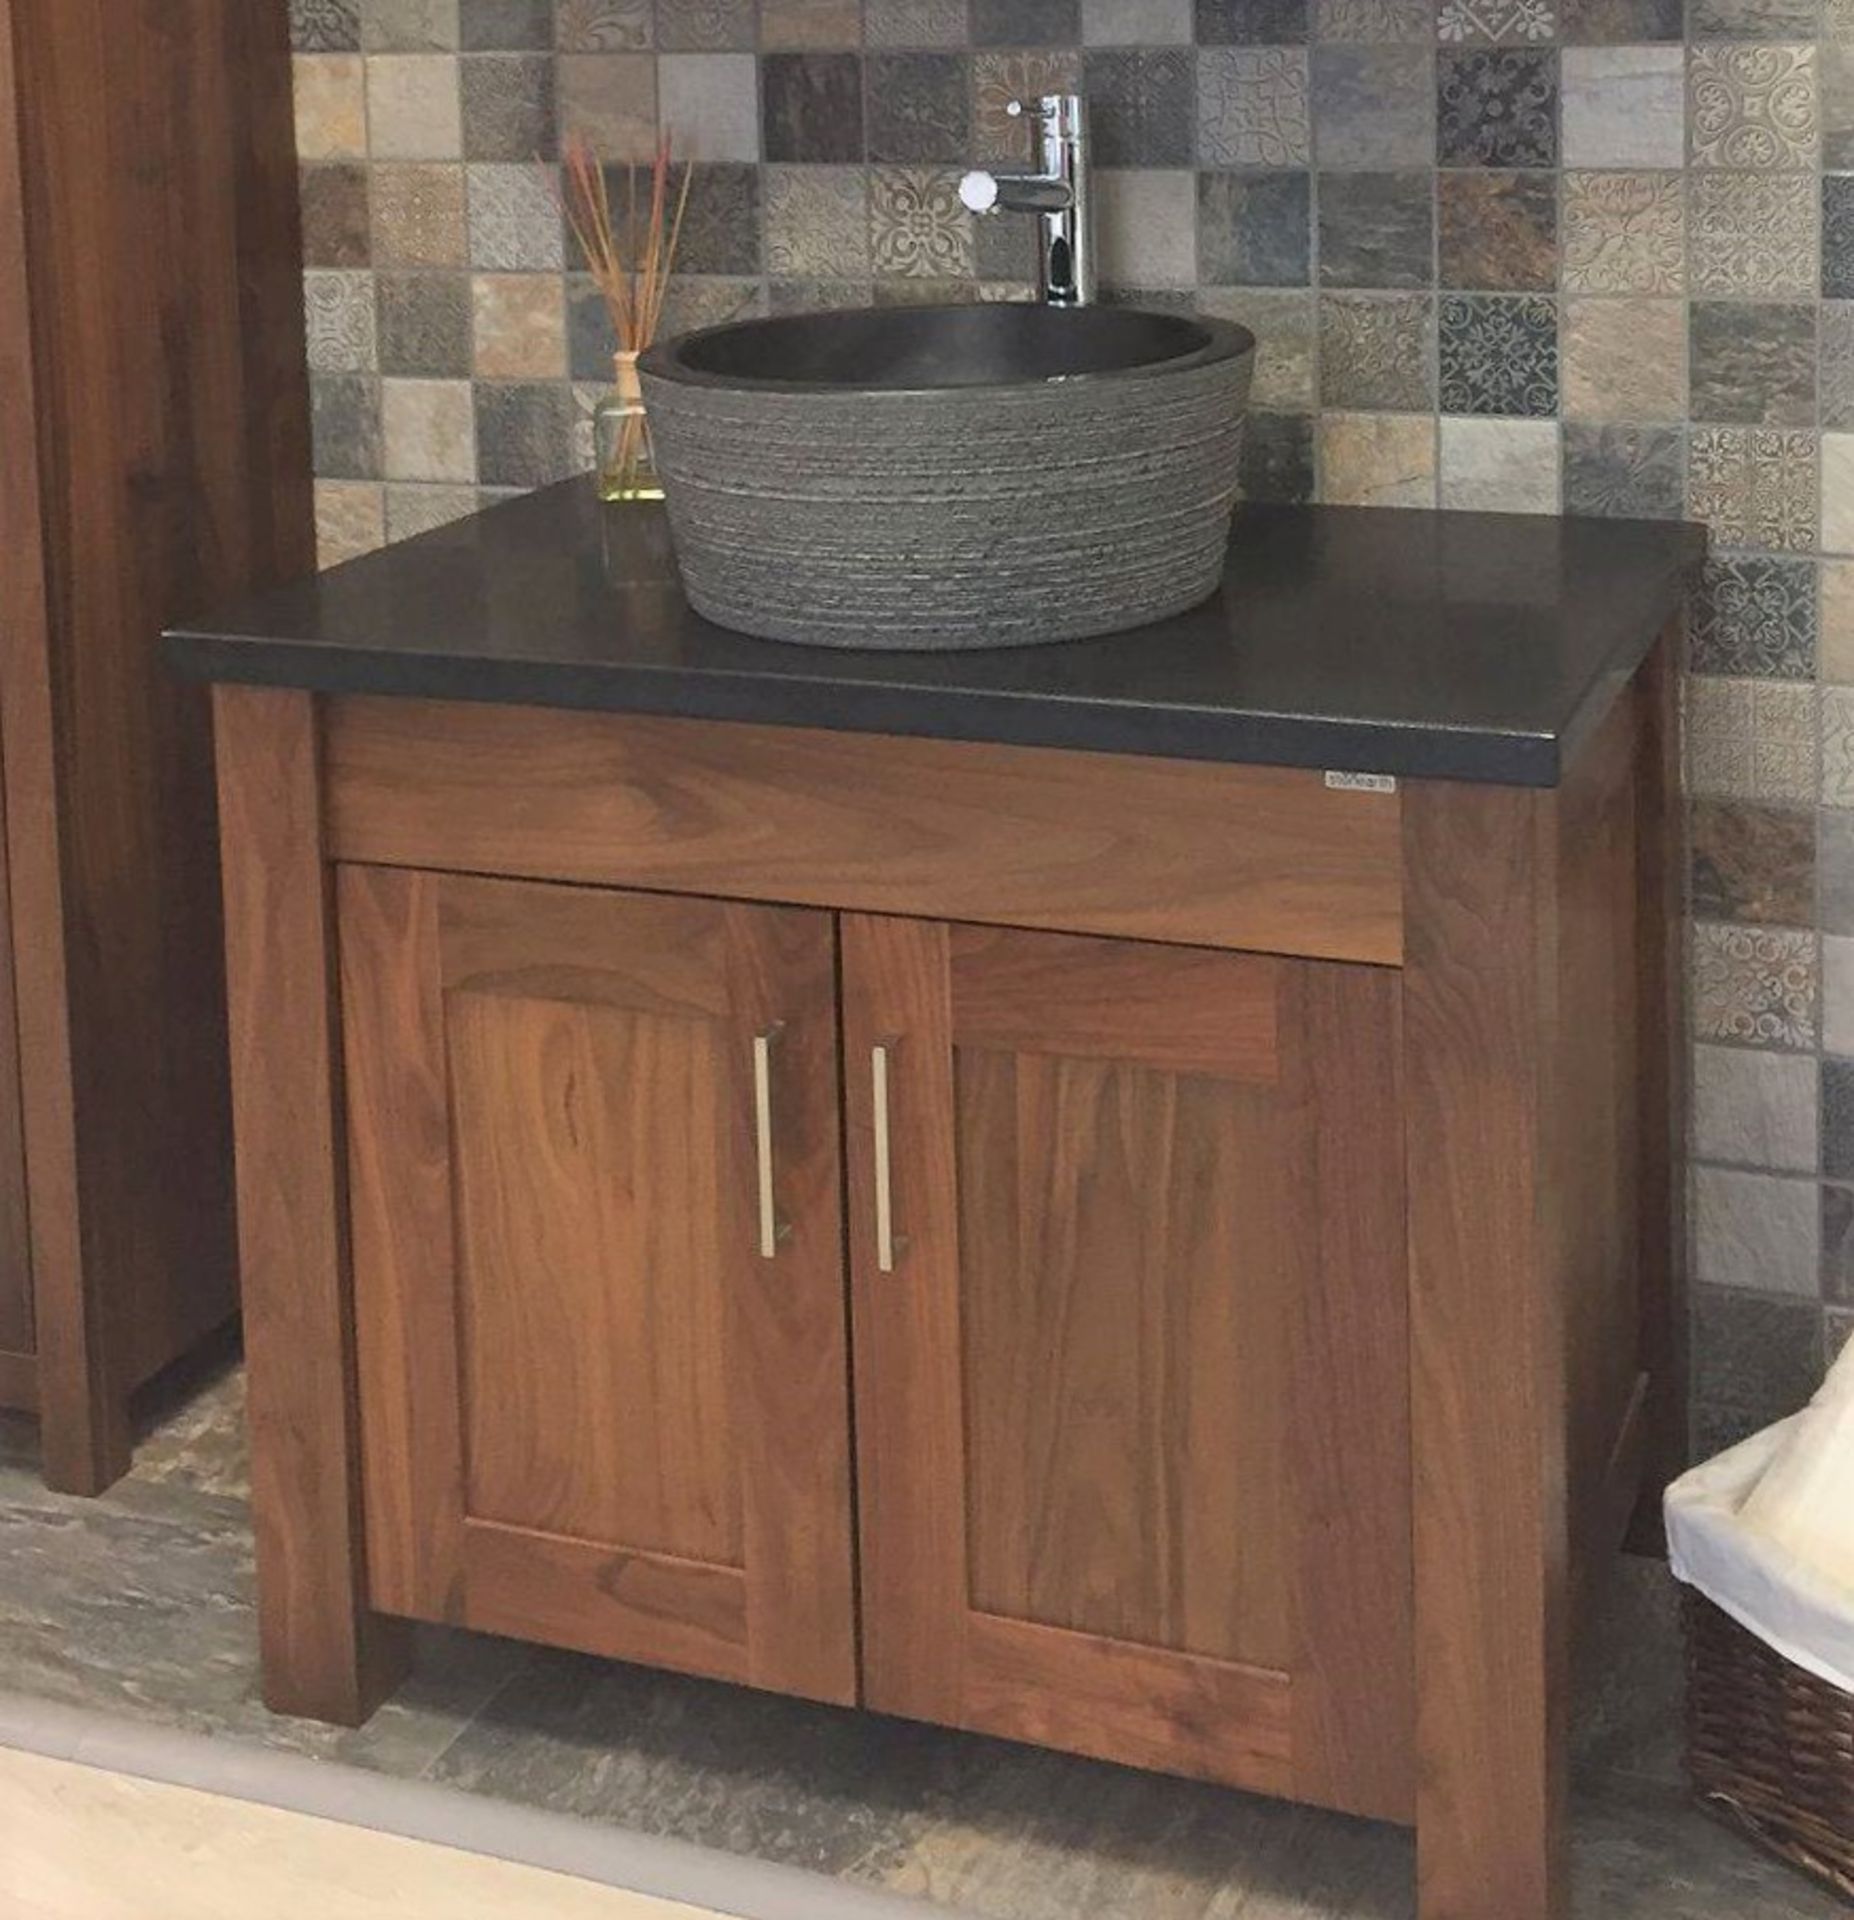 1 x Stonearth 'Finesse' Countertop Washstand - American Solid Walnut - Original RRP £1,400 - Image 8 of 8